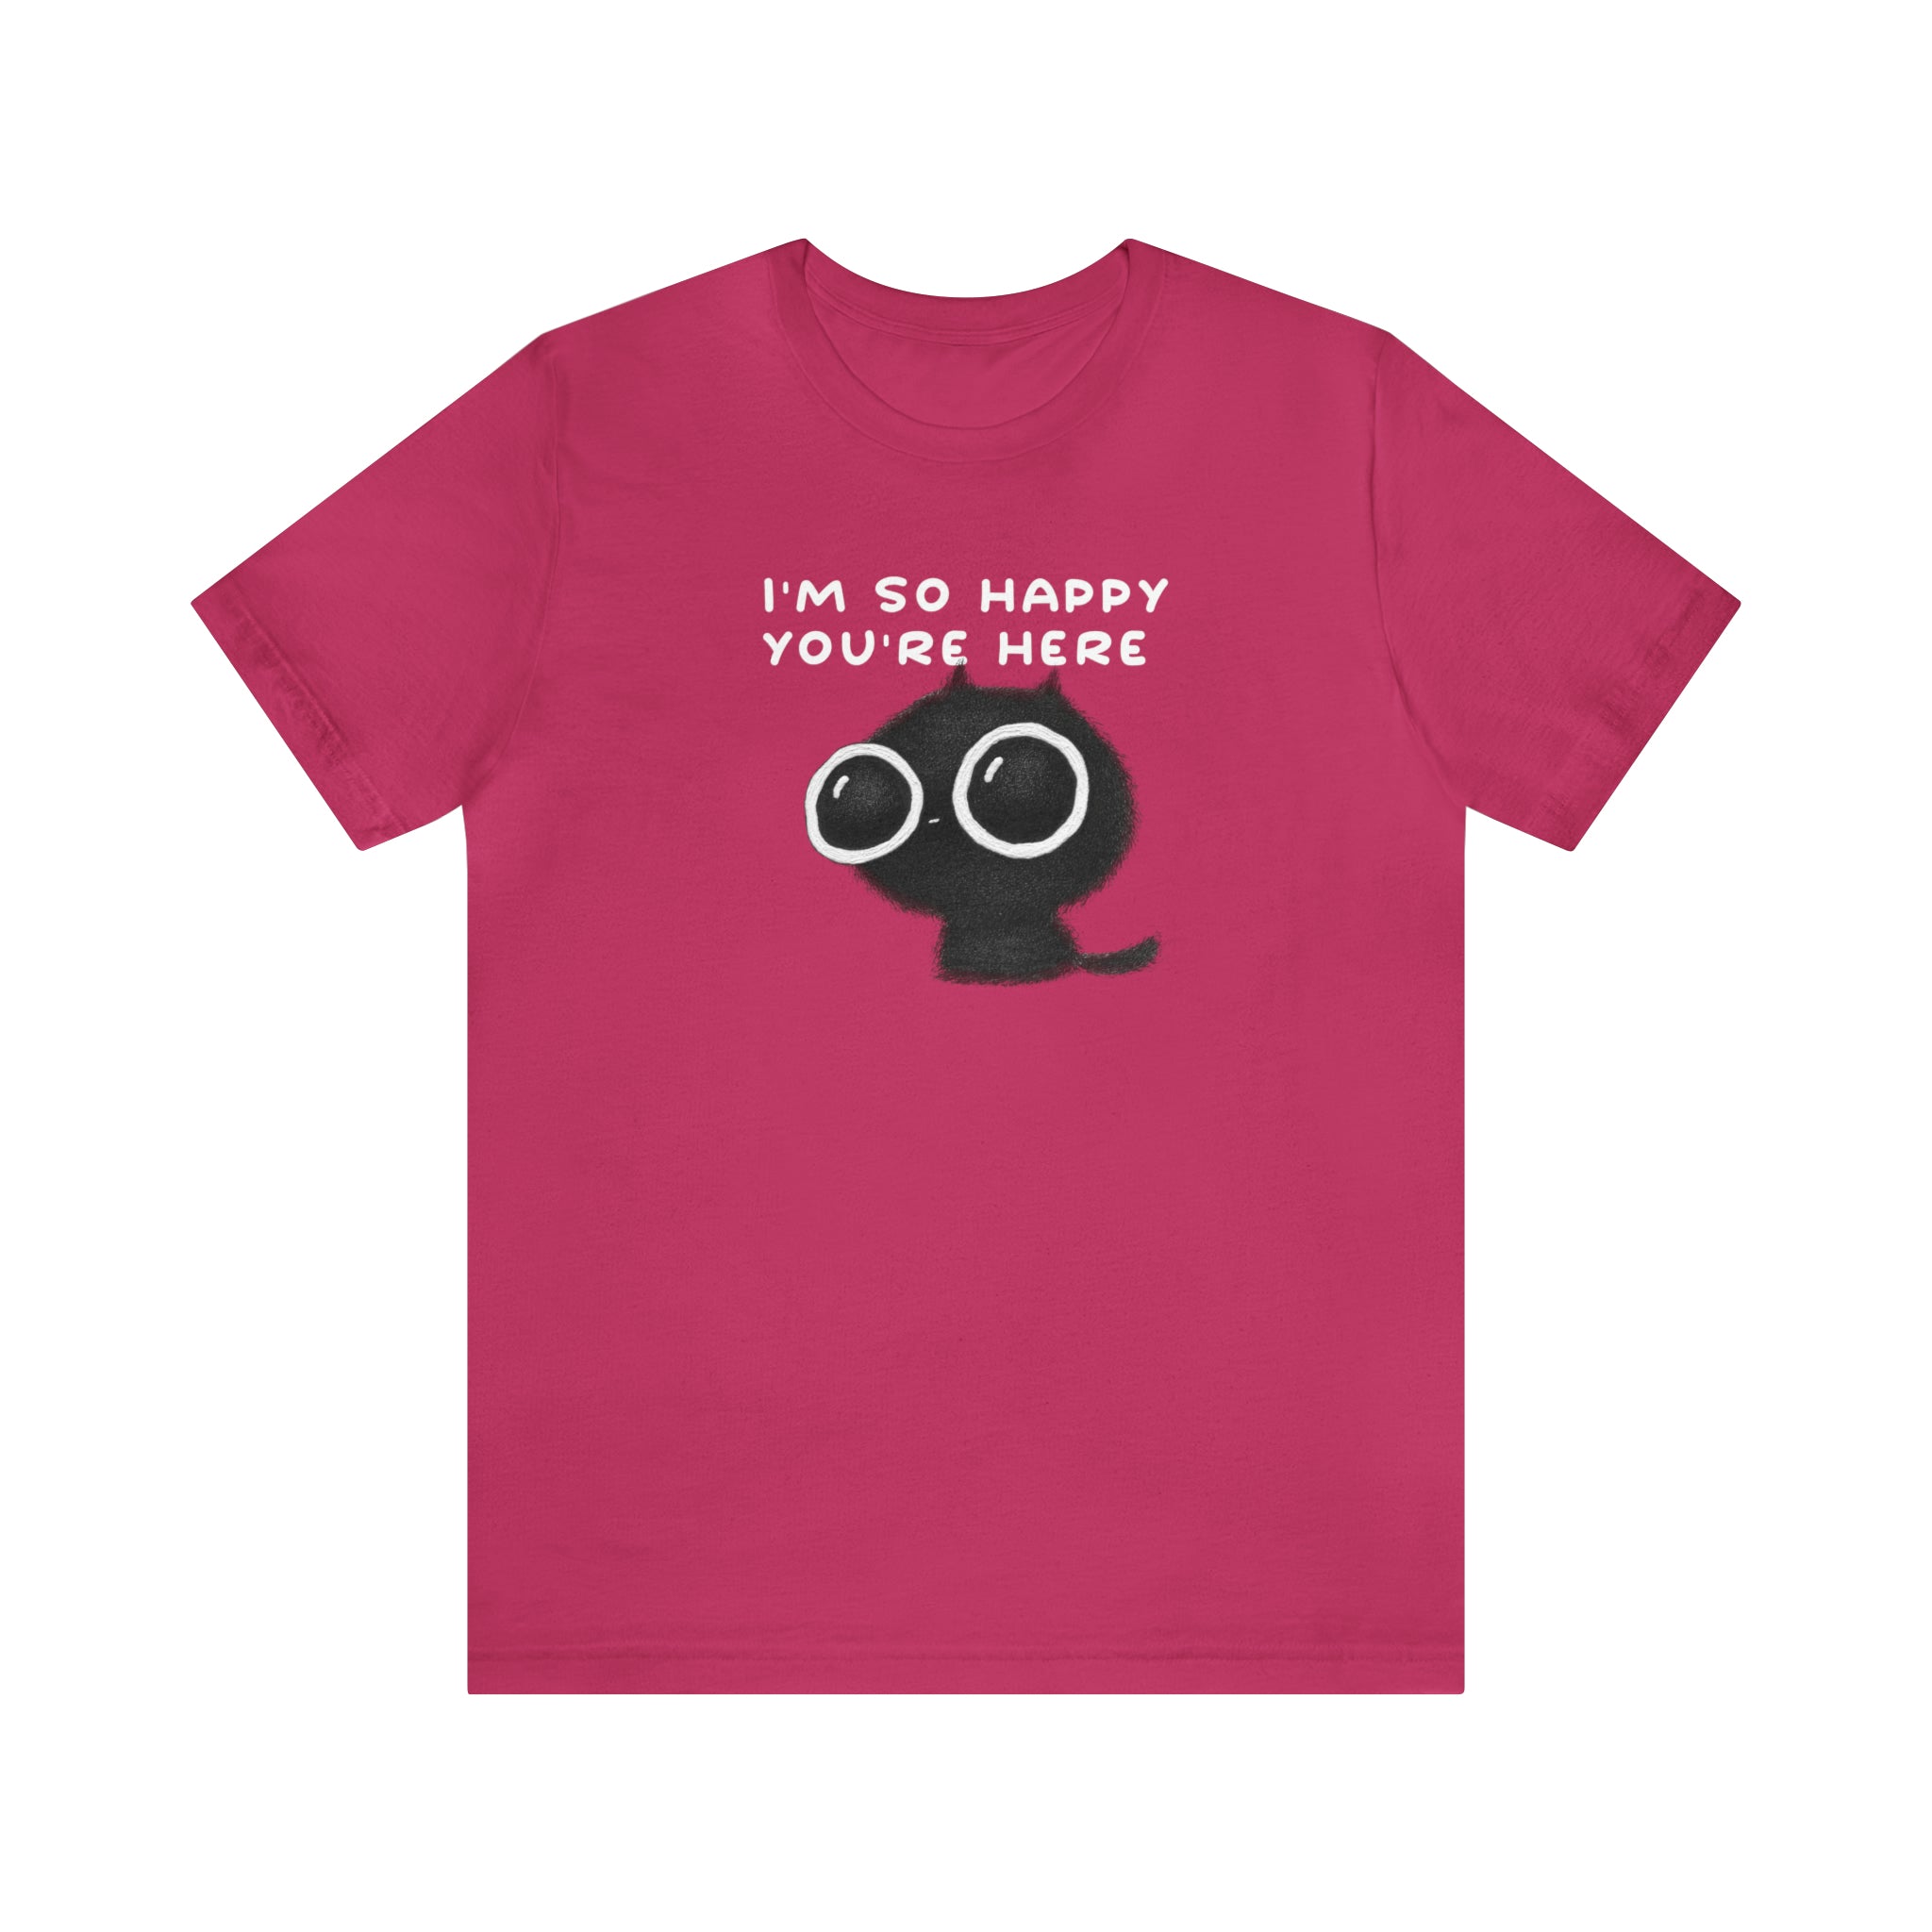 I'm So Happy You're Here : Unisex 100% Comfy Cotton, T-Shirt by Bella+Canvas